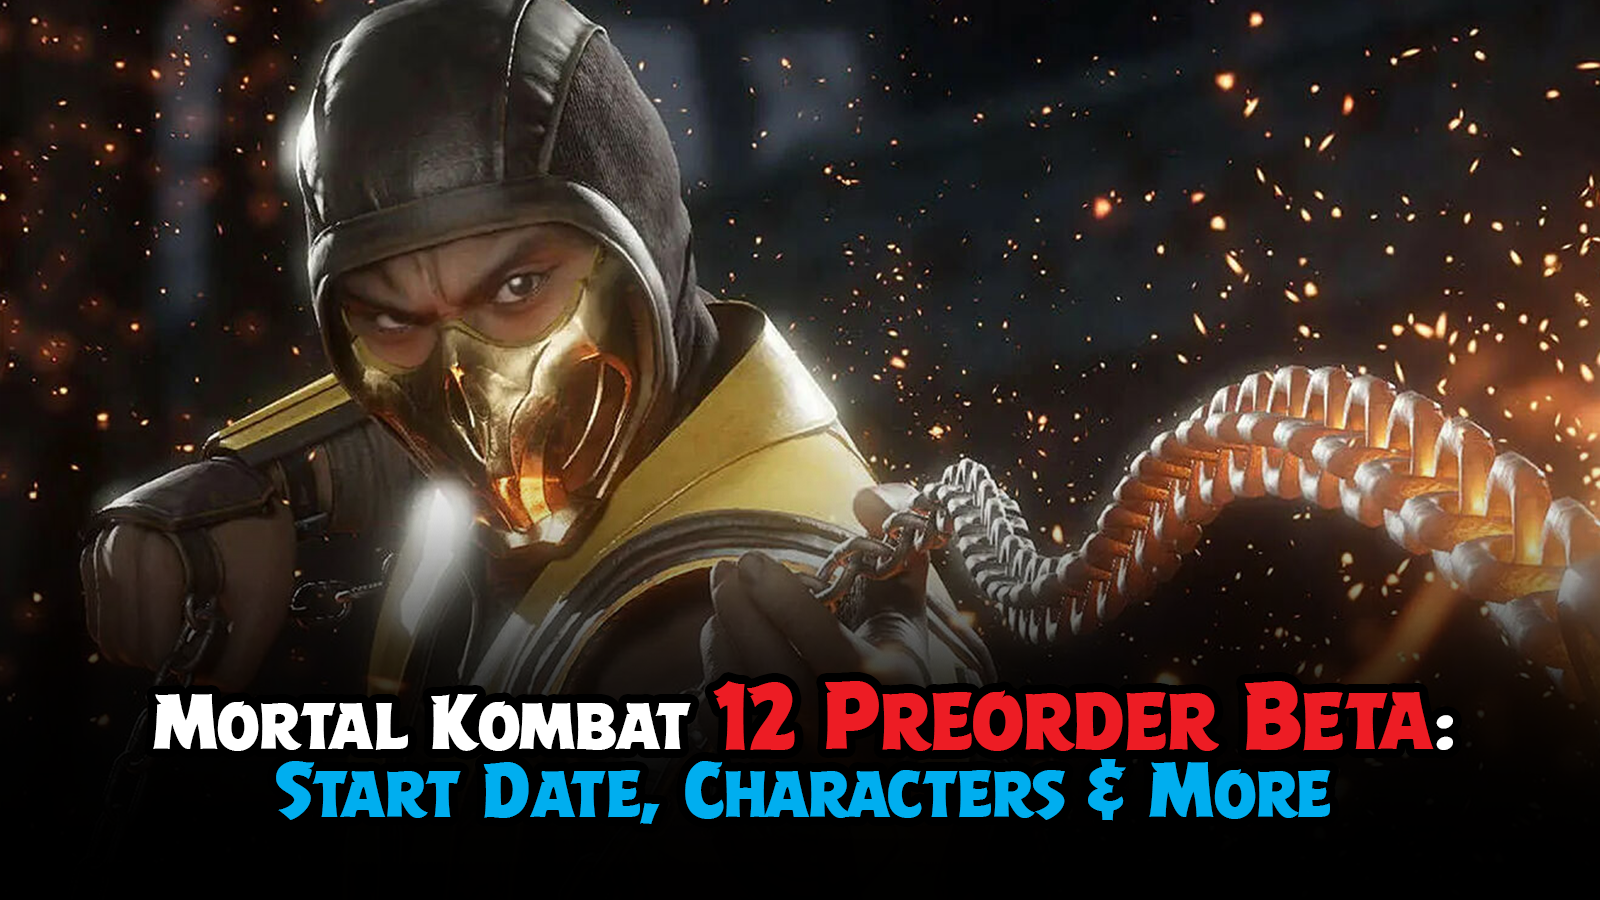 Mortal Kombat 12 Preorder Beta: Start Date, Characters, How to Get In, and More